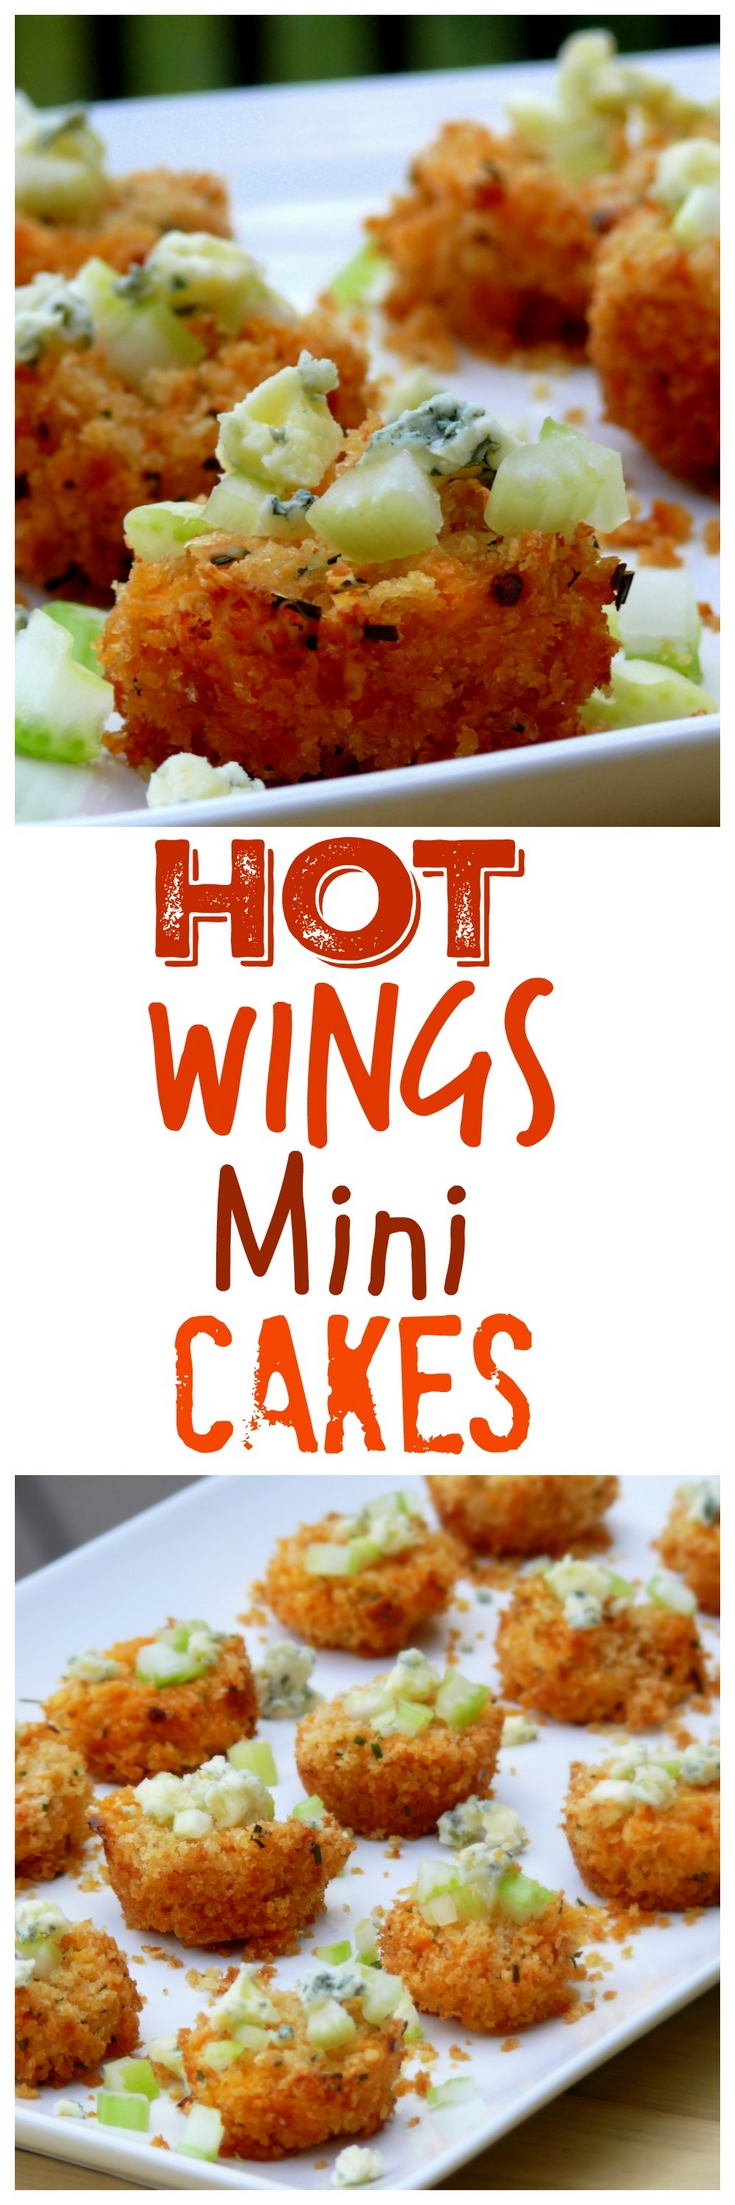 VIDEO + Recipe: HOT WING MINI CAKES are the perfect appetizer bites full of chicken, sauce and all the hot wing goodness. The panko crust emulates the crispy wings you love from NoblePig.com. via @cmpollak1